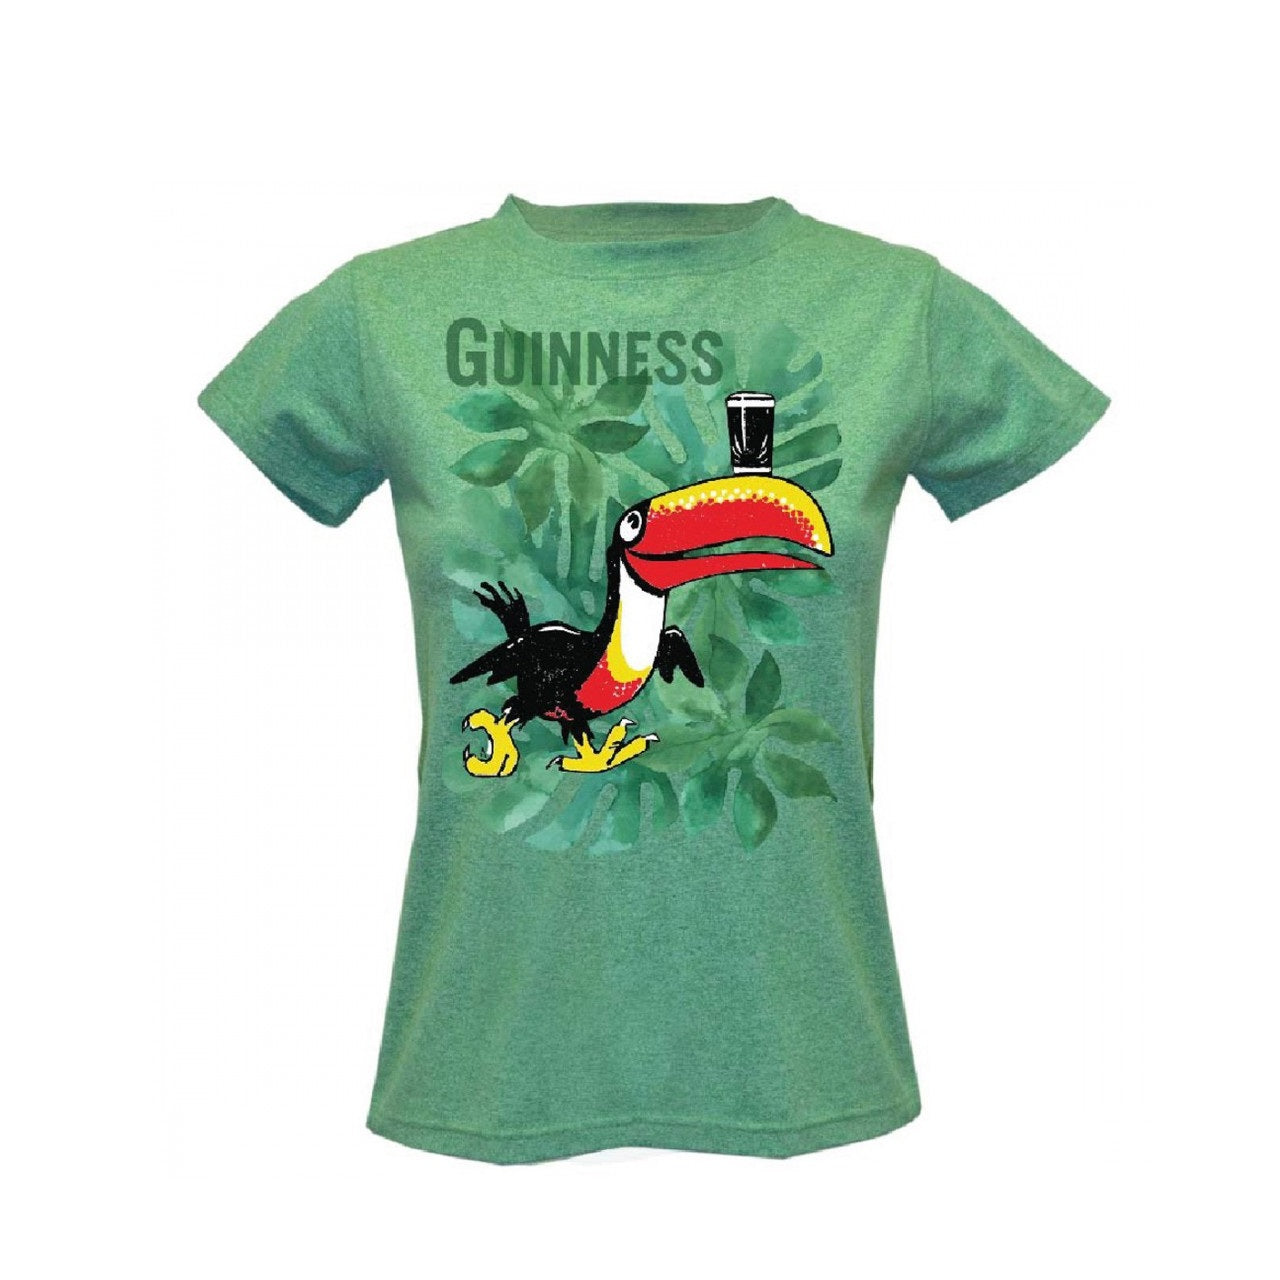 Guinness Green Toucan Ladies T-Shirt  T-shirt with printed graphic features the time-honoured Guinness toucan mascot, crew neck classic fit for comfort and style  - Official Guinness merchandise - Ladies fit t-shirt - Green - Machine Washable